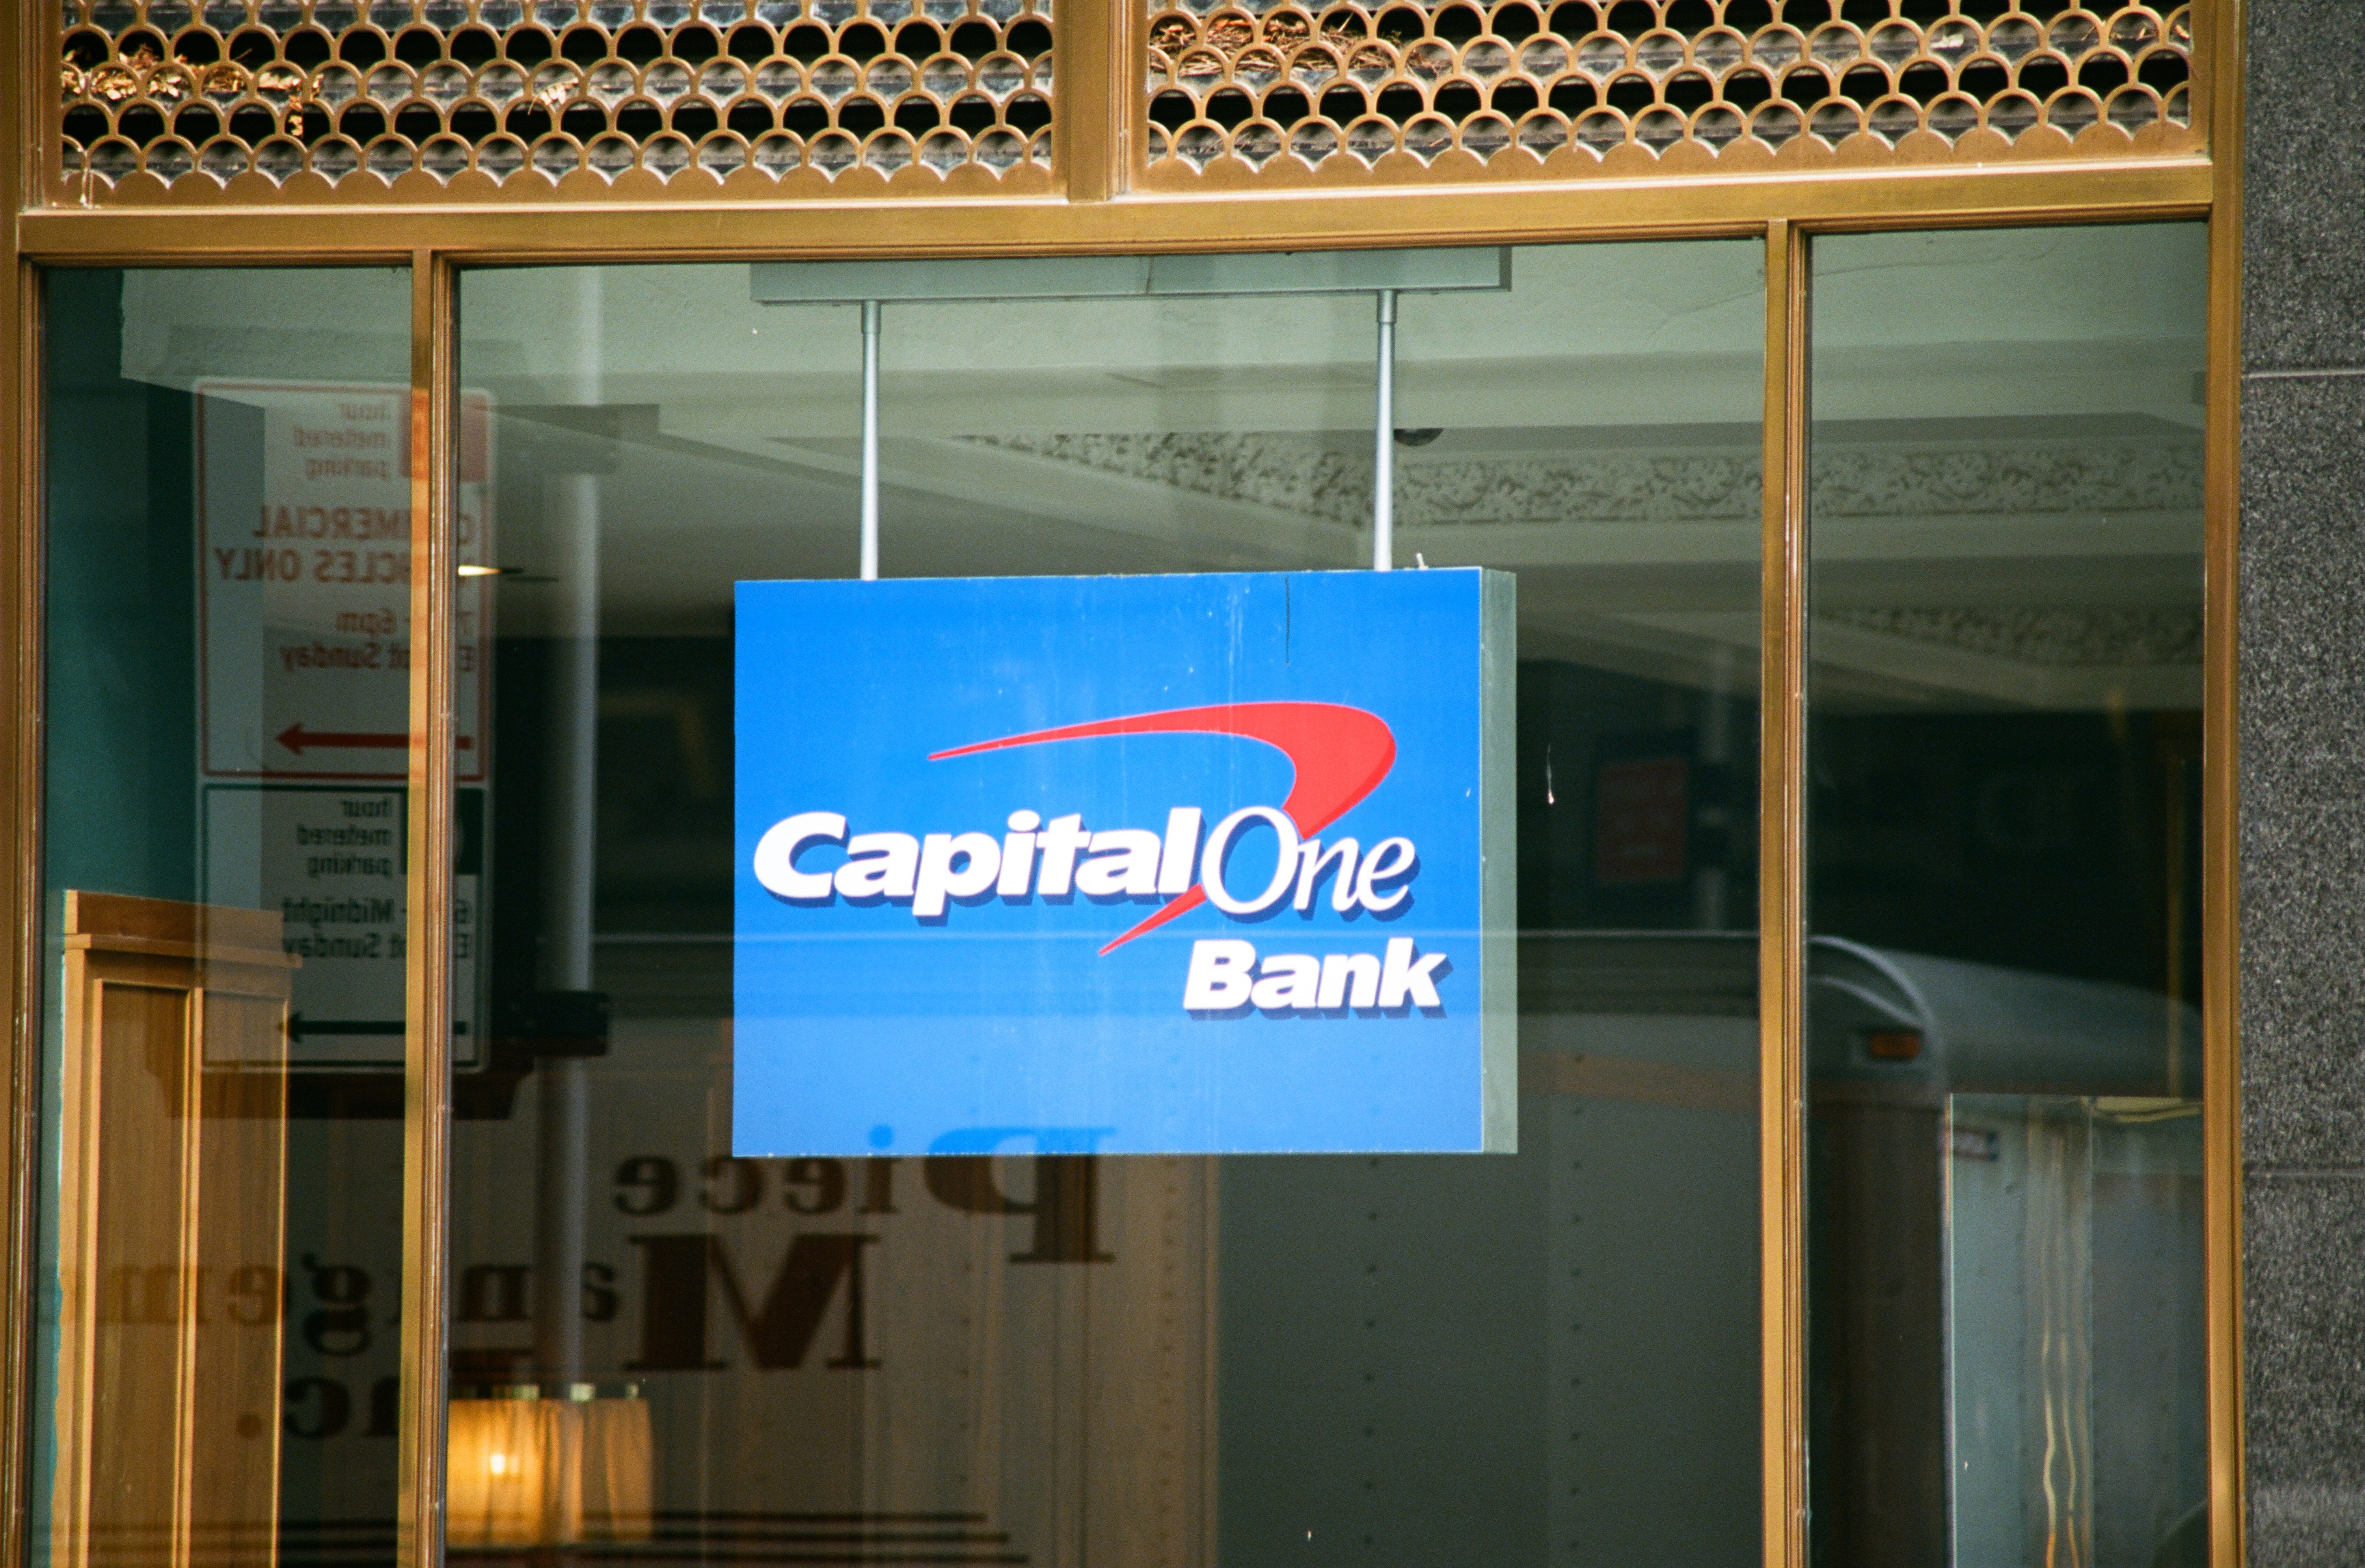 Capital one online chat support